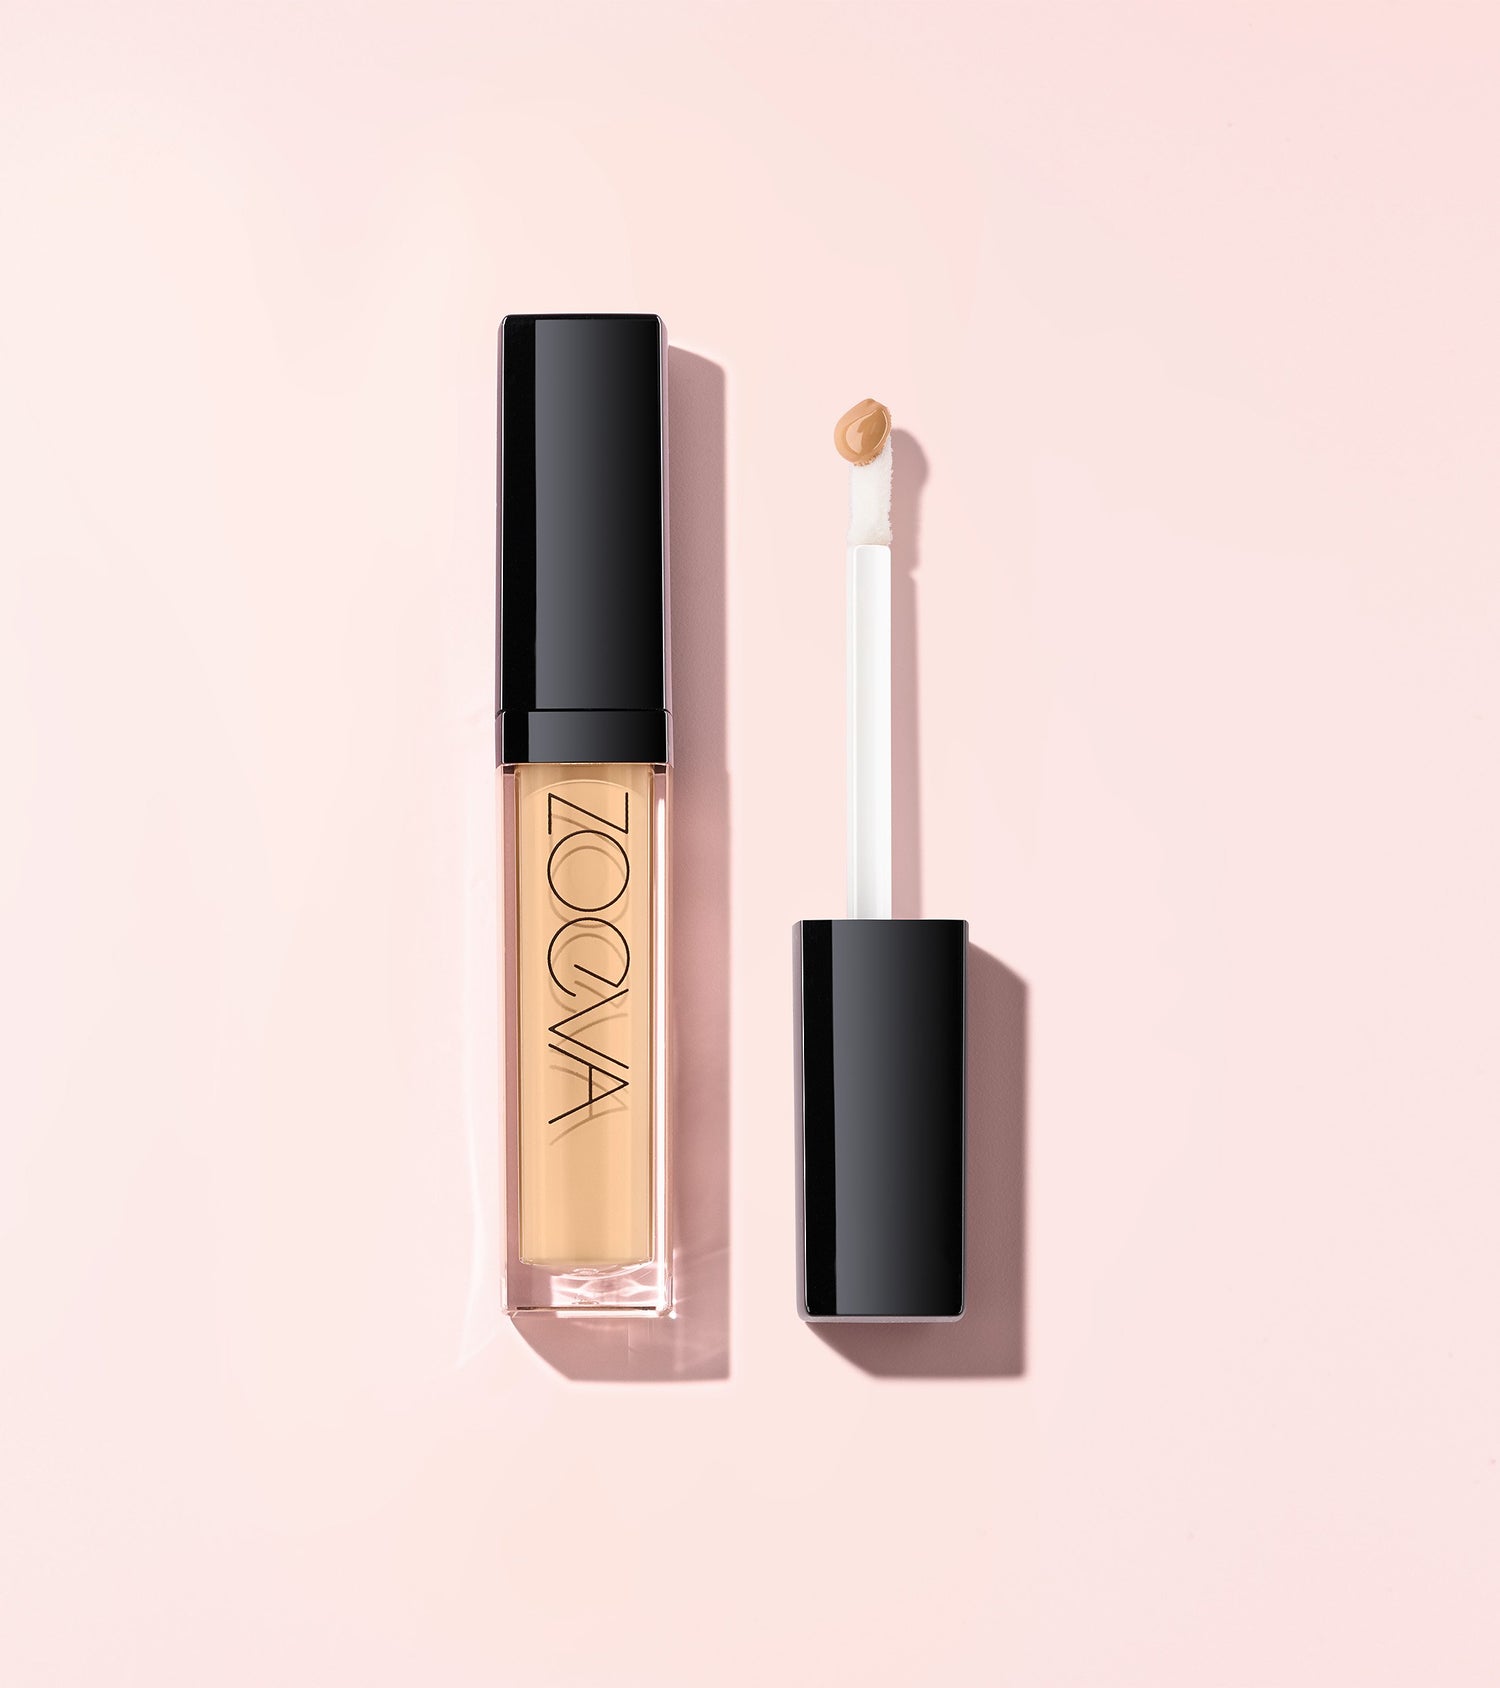 AUTHENTIK SKIN PERFECTOR CONCEALER (180 OFFICIAL) Main Image featured